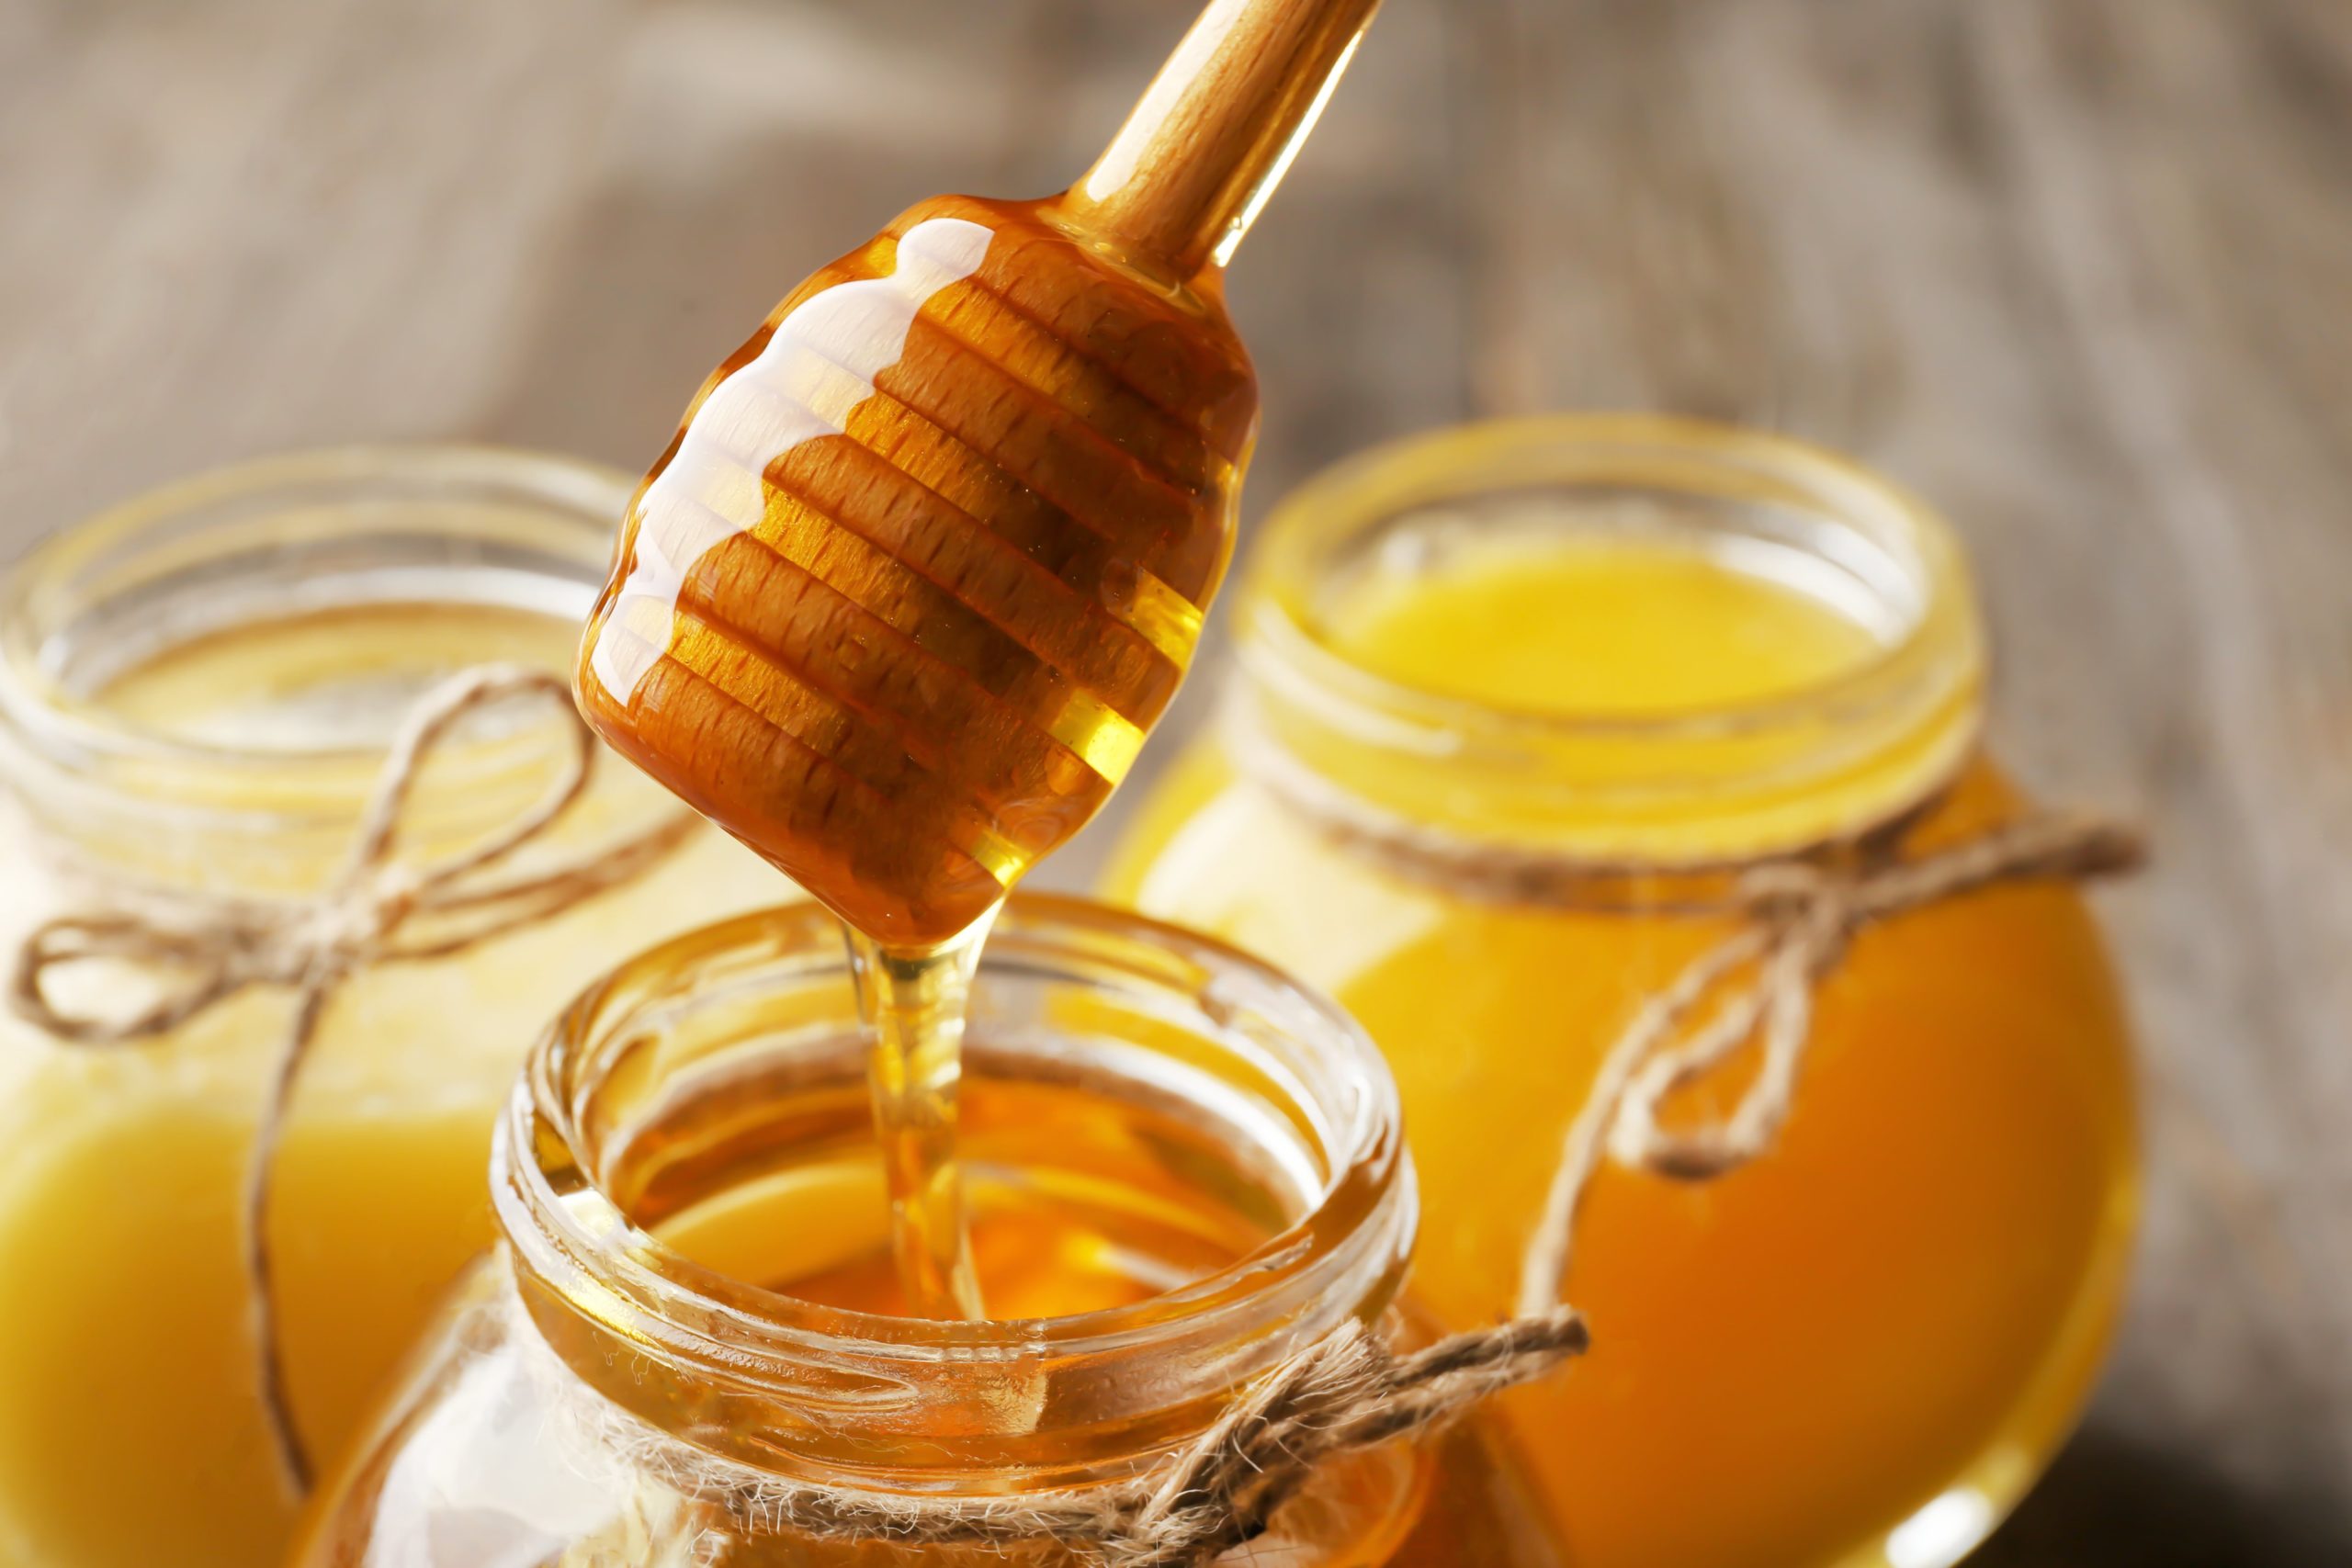 Honey effective at relieving URTI symptoms, analysis concludes - The Pharmaceutical Journal